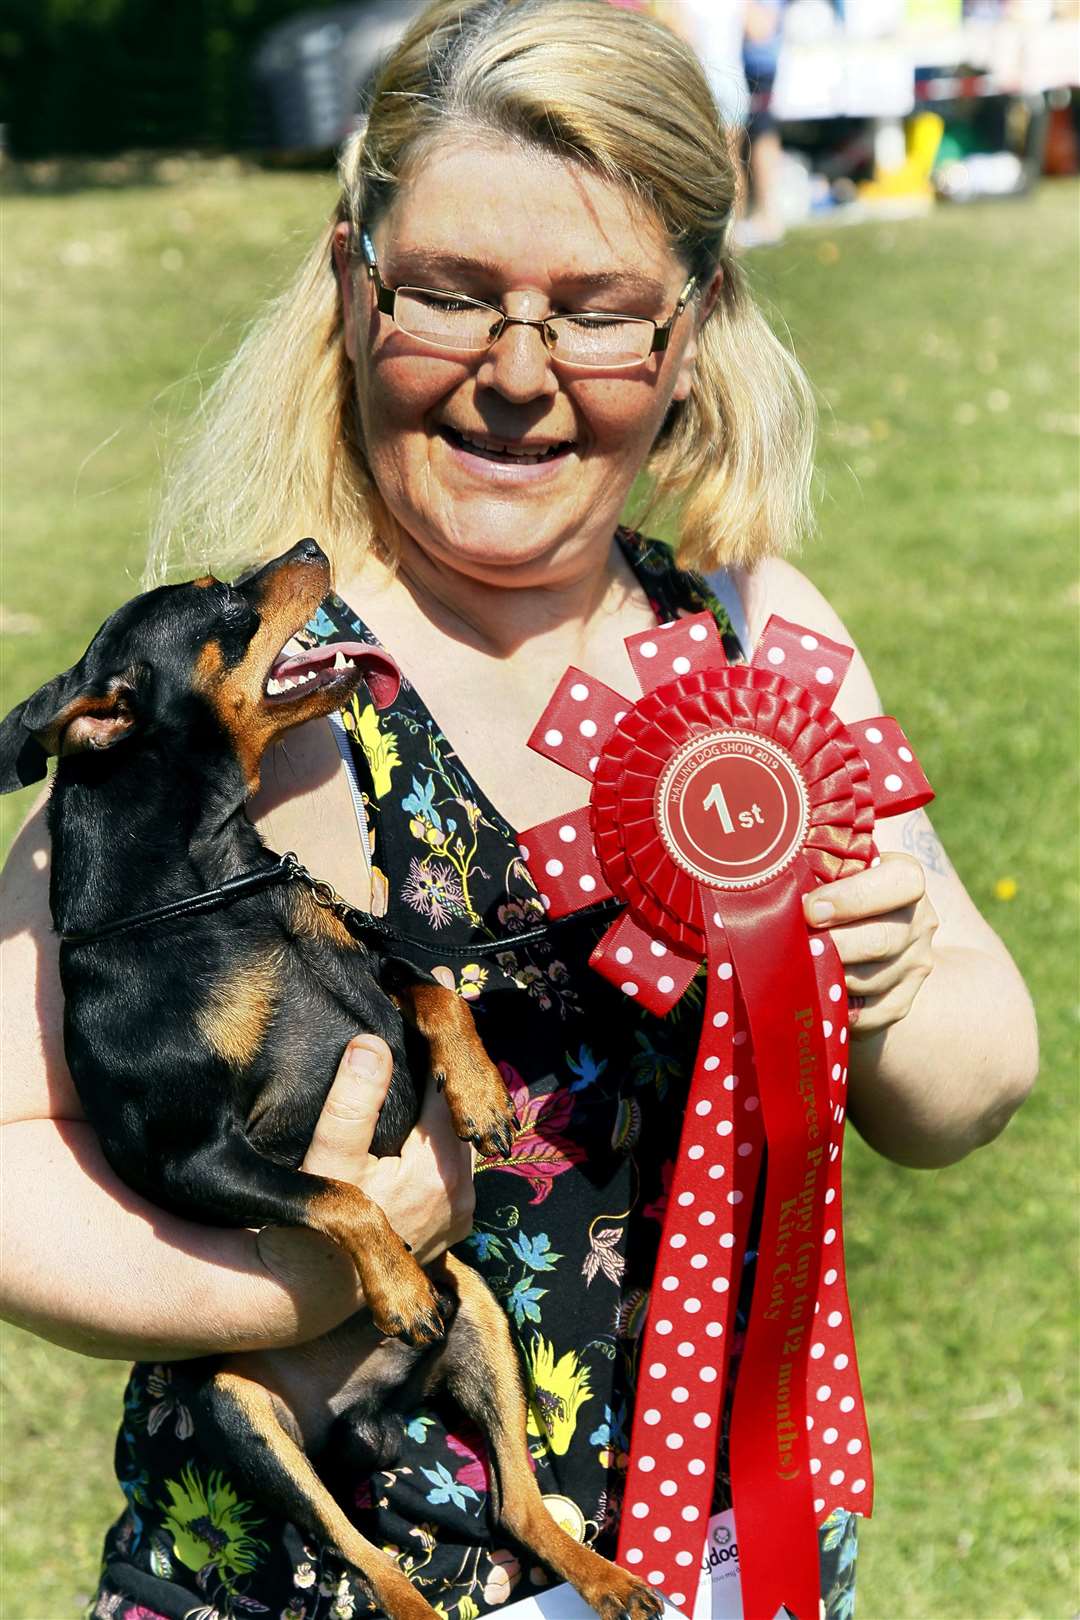 Donna Davis, came 1st with Leif the pedigree puppy. Picture: Sean Aidan (15721360)